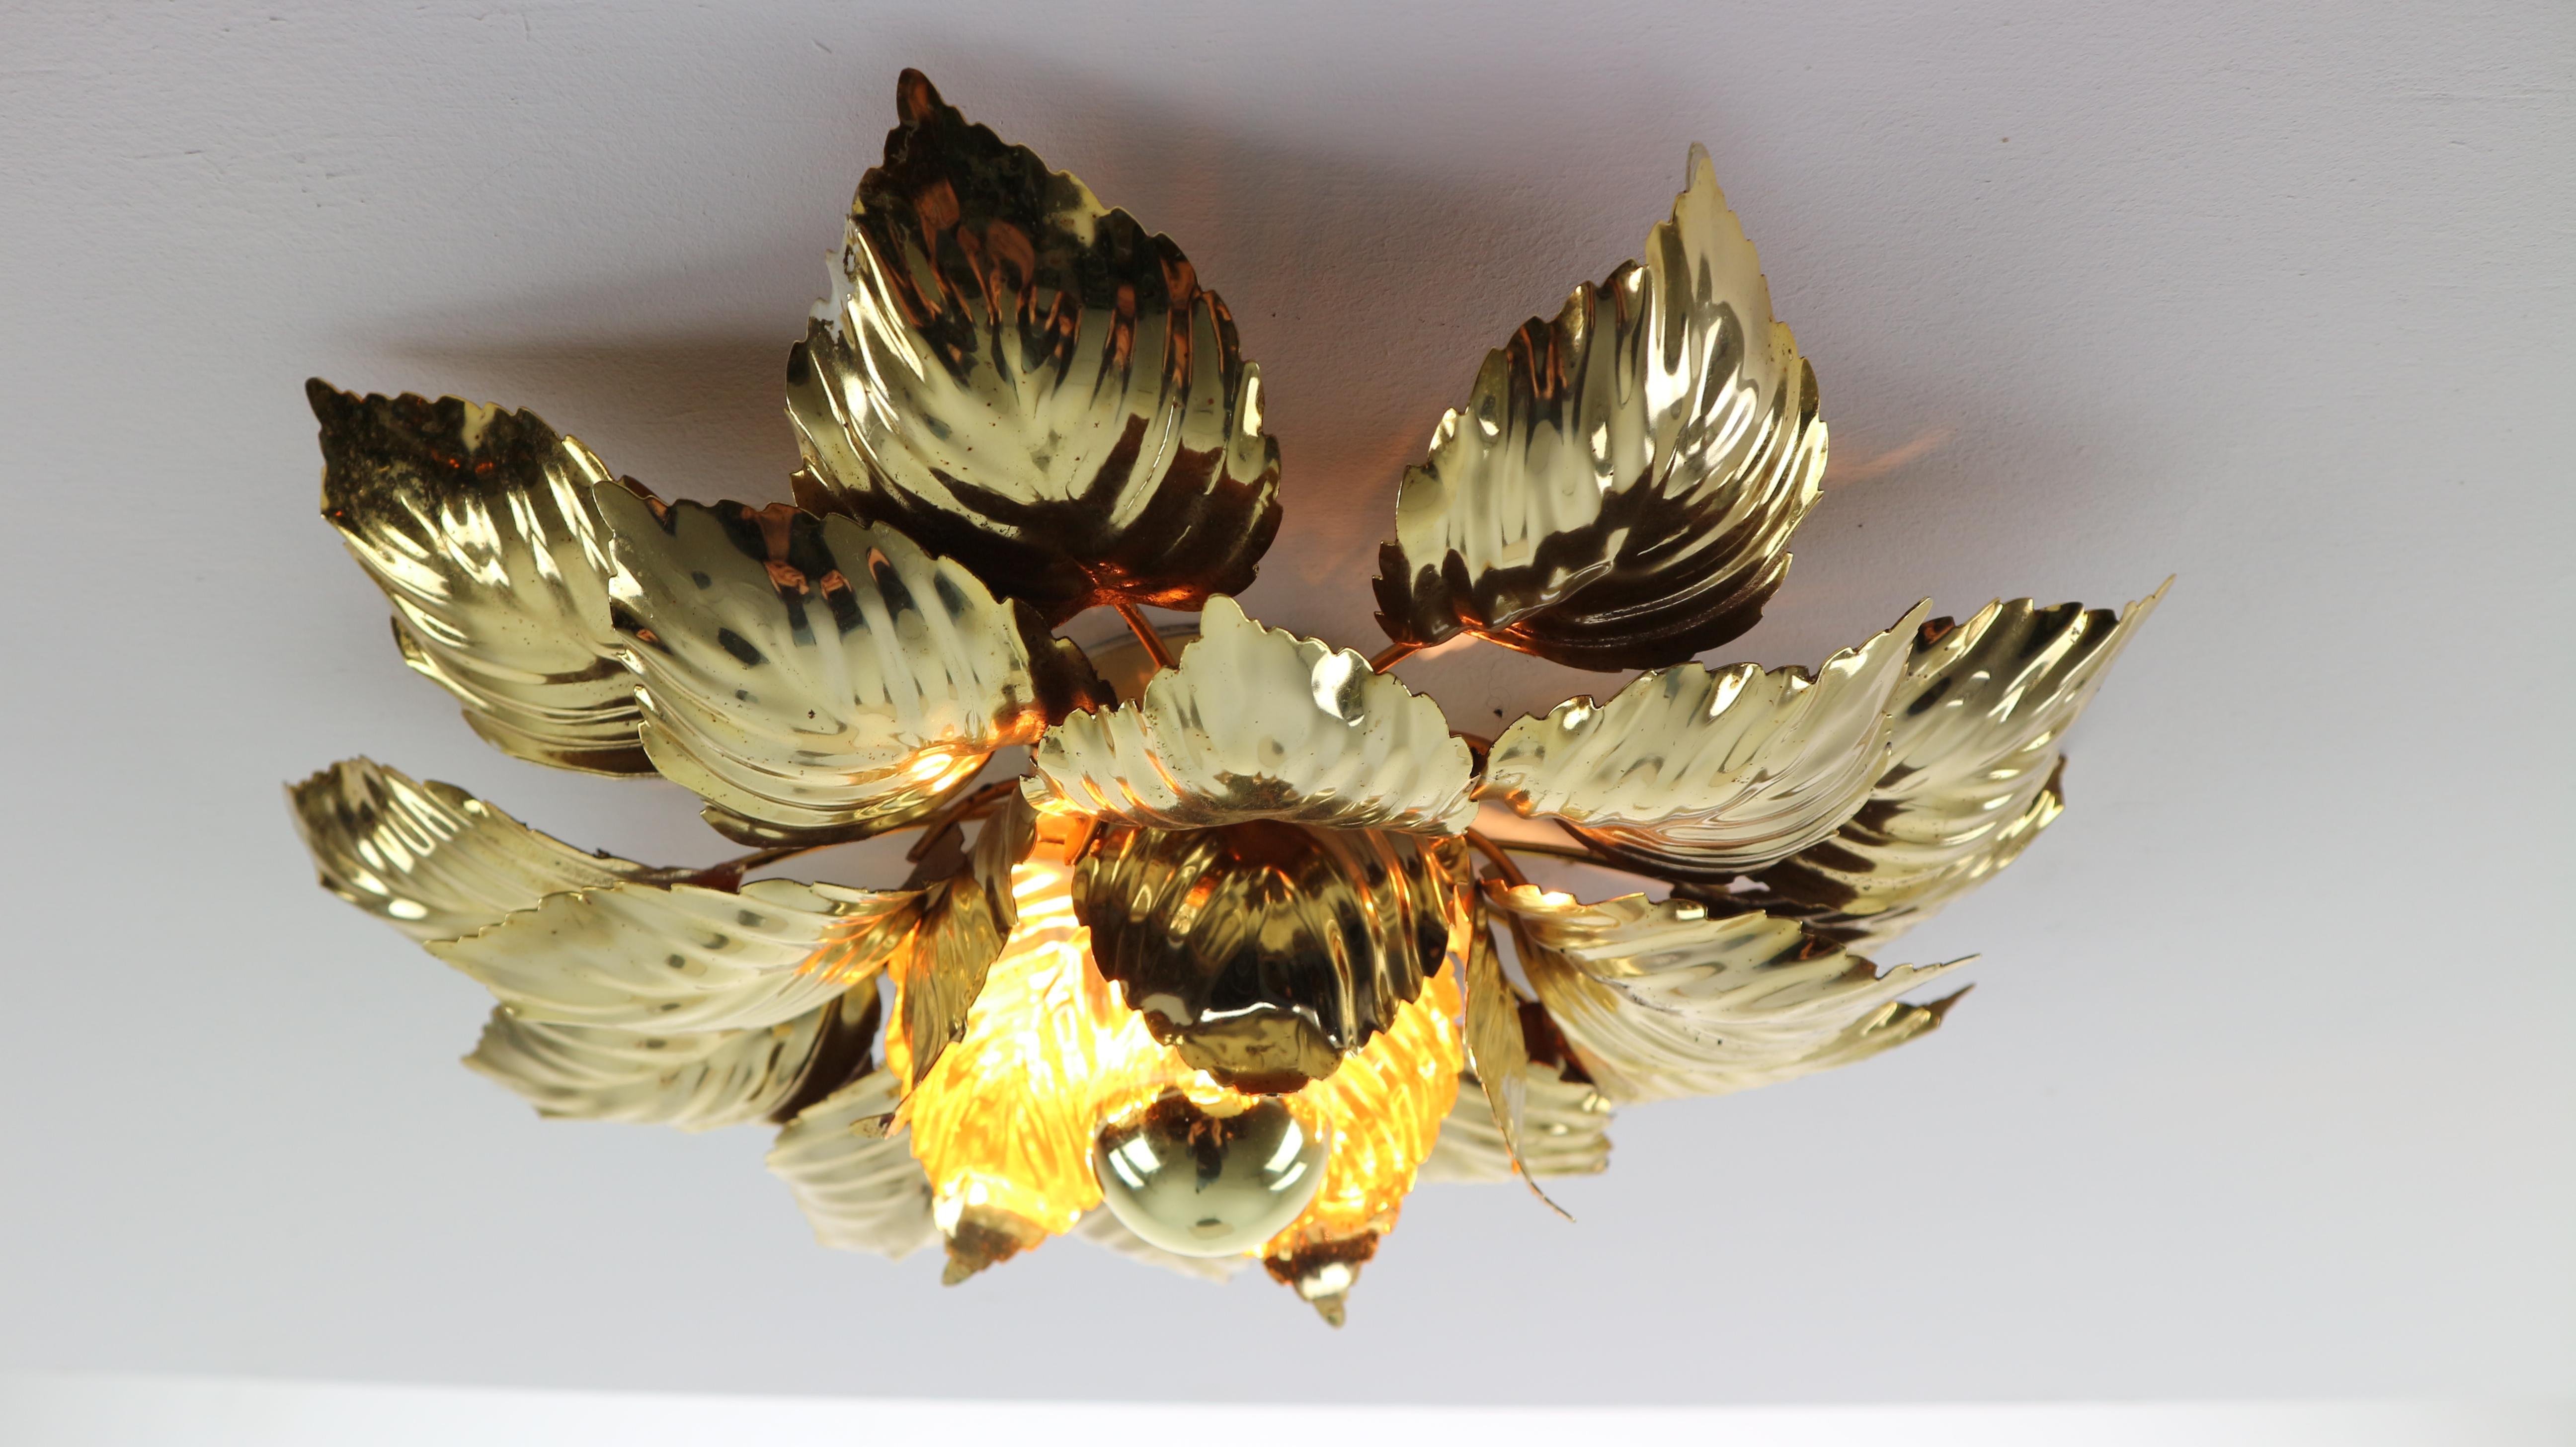 Vintage Mid-Century Modern, Willy Daro brass wall or ceiling light with brass leave ornaments made in 1970s.
Gives beautiful, elegant and warm lightening.
 